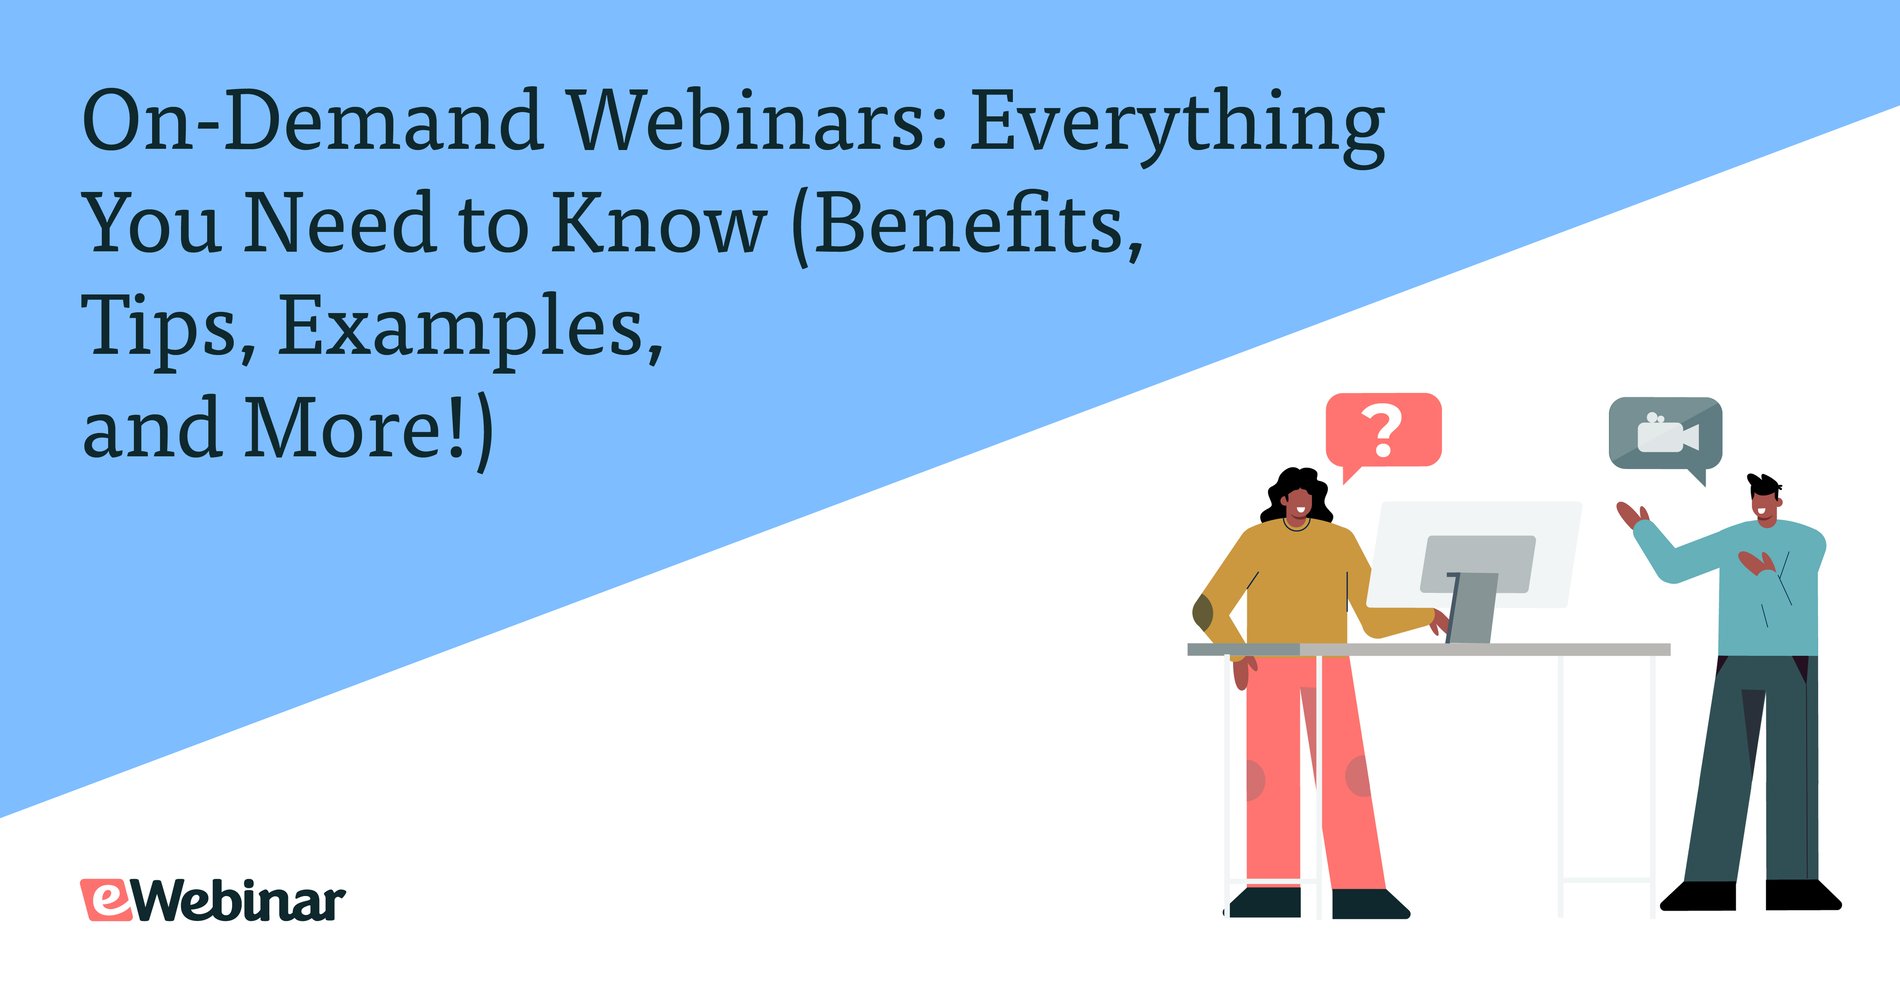 On-Demand Webinars: Everything You Need to Know (Benefits, Tips, Examples & More!)